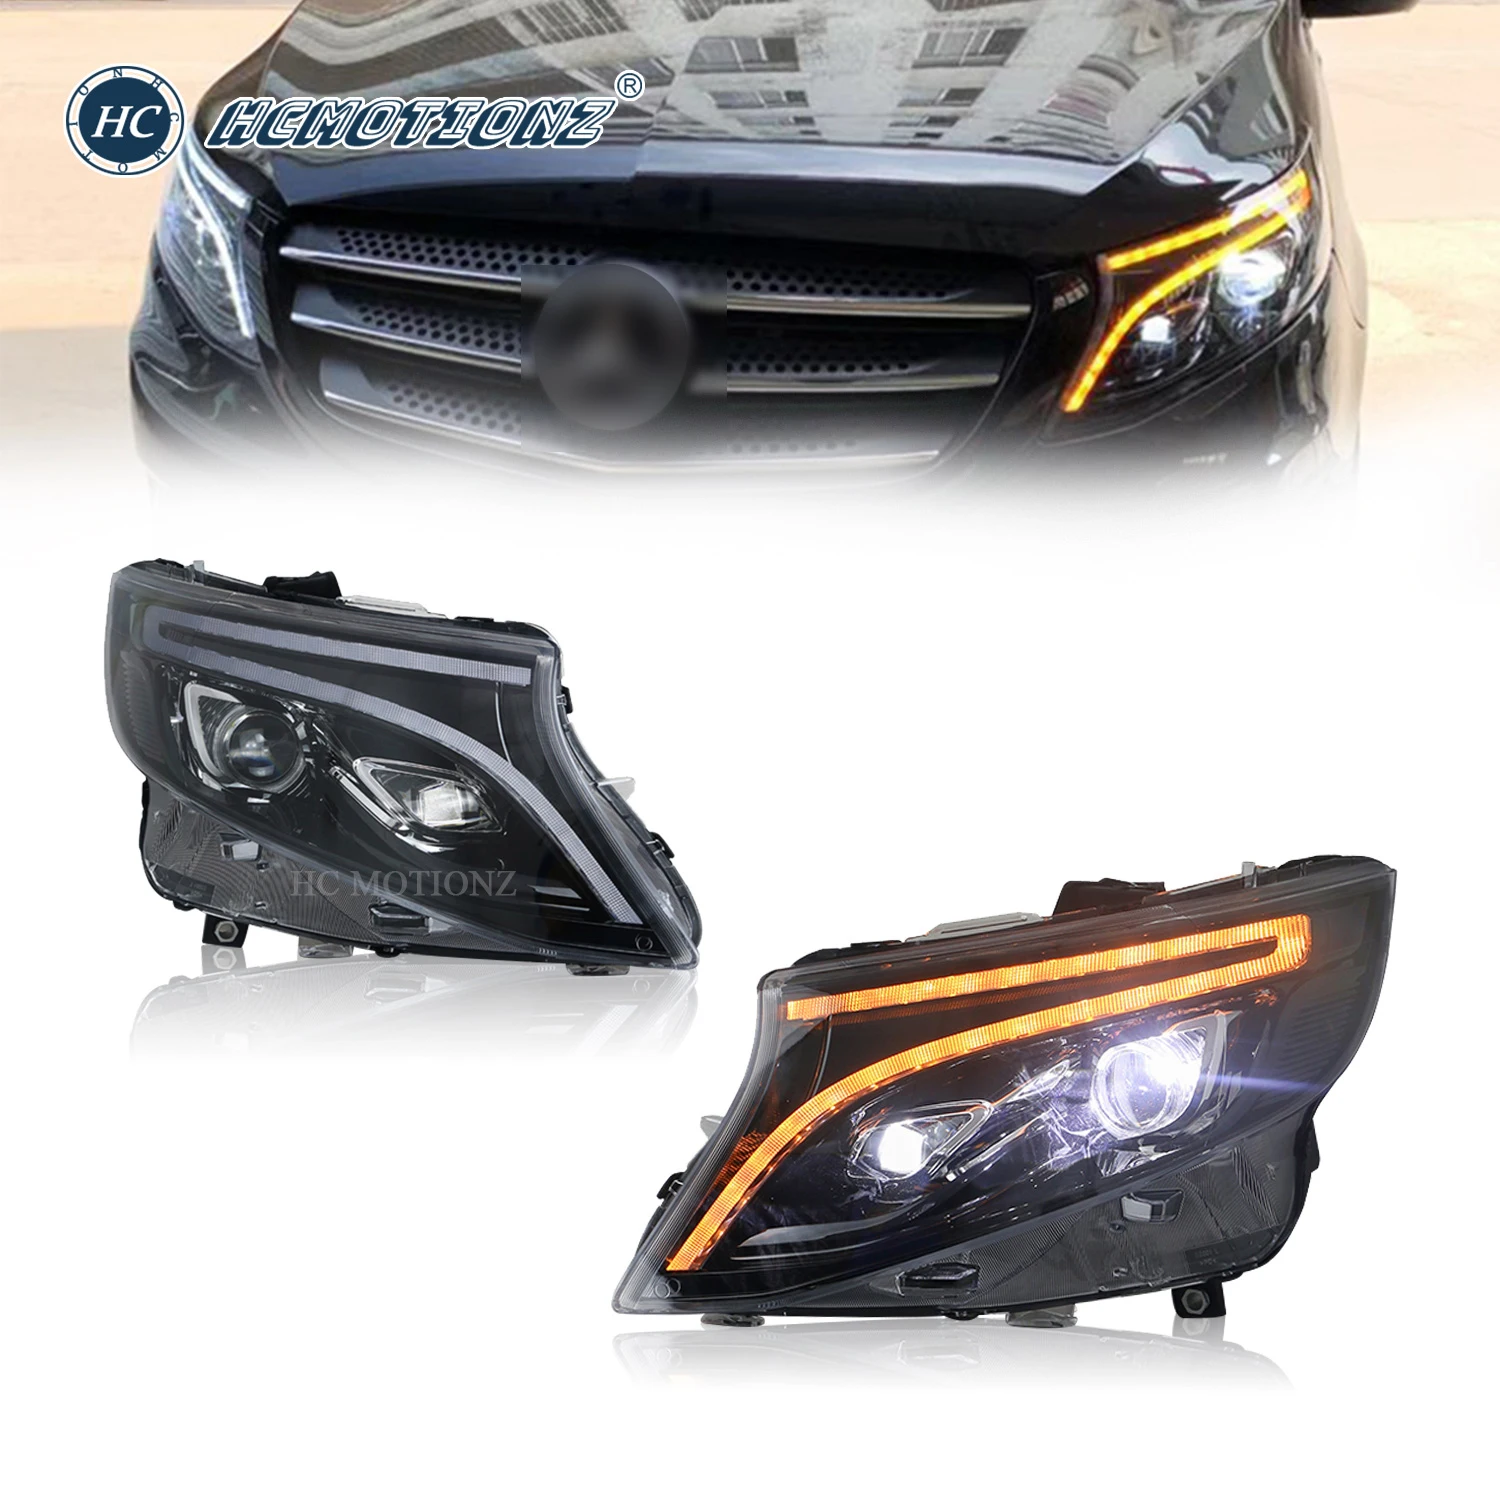 HCMOTIONZ LED Headlights for Mercedes-Benz Vito 2014-2020 Car